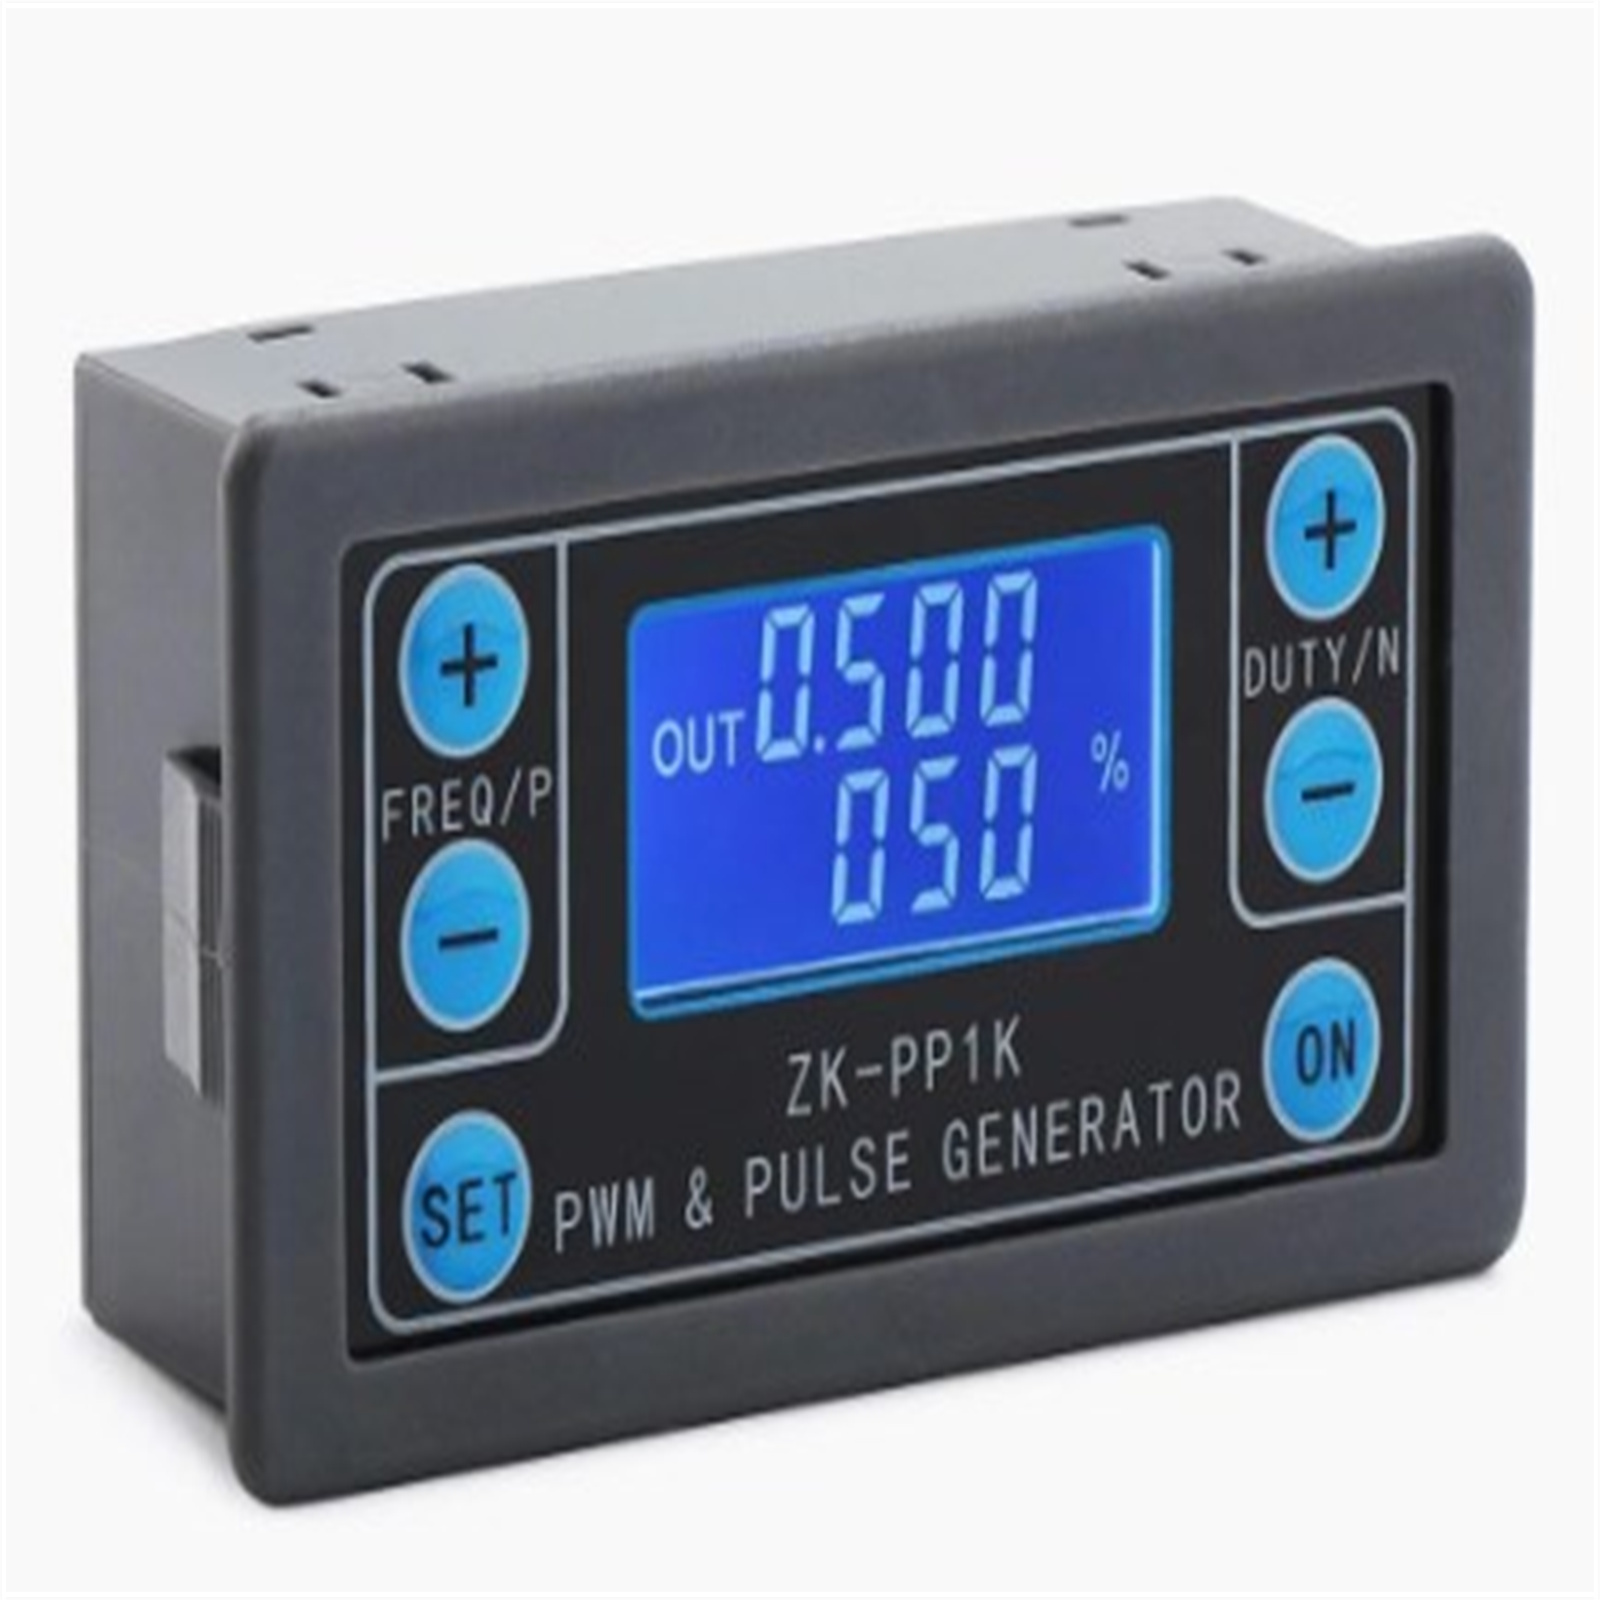 ZK-PP1K Dual Mode Signal Generator LCD PWM 1-Channel 1Hz-150KHz PWM Pulse Frequency Duty Cycle Adjustable Square Wave Generator